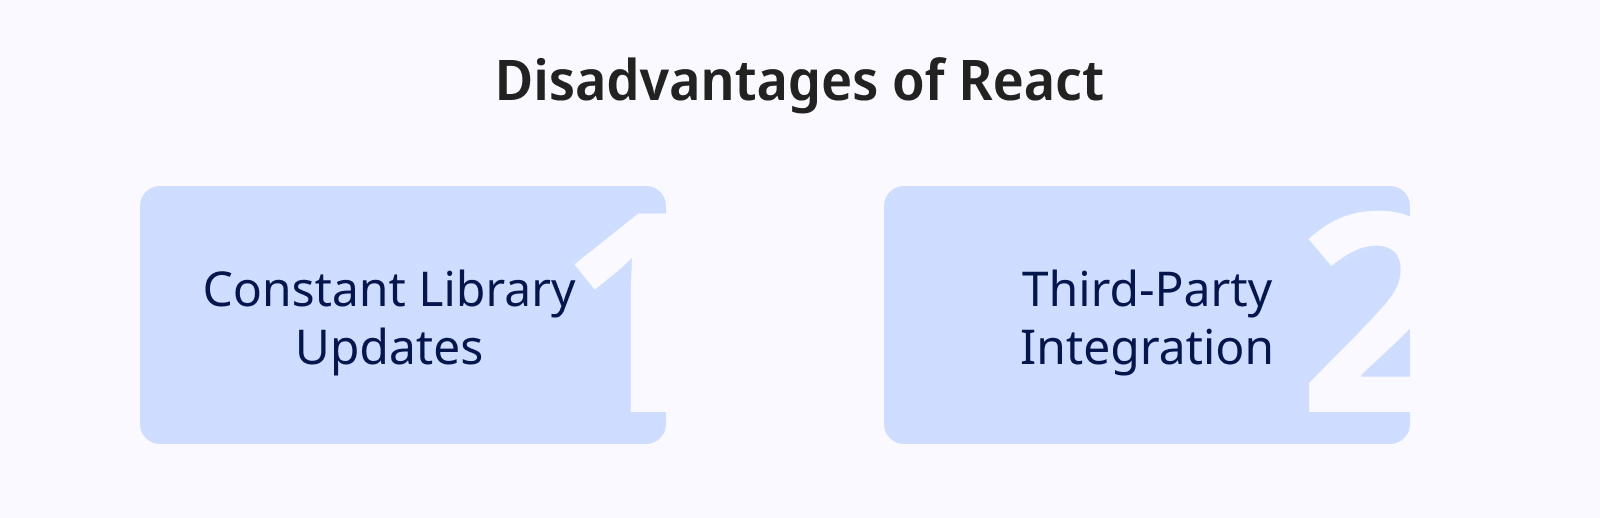 Disadvantages of React